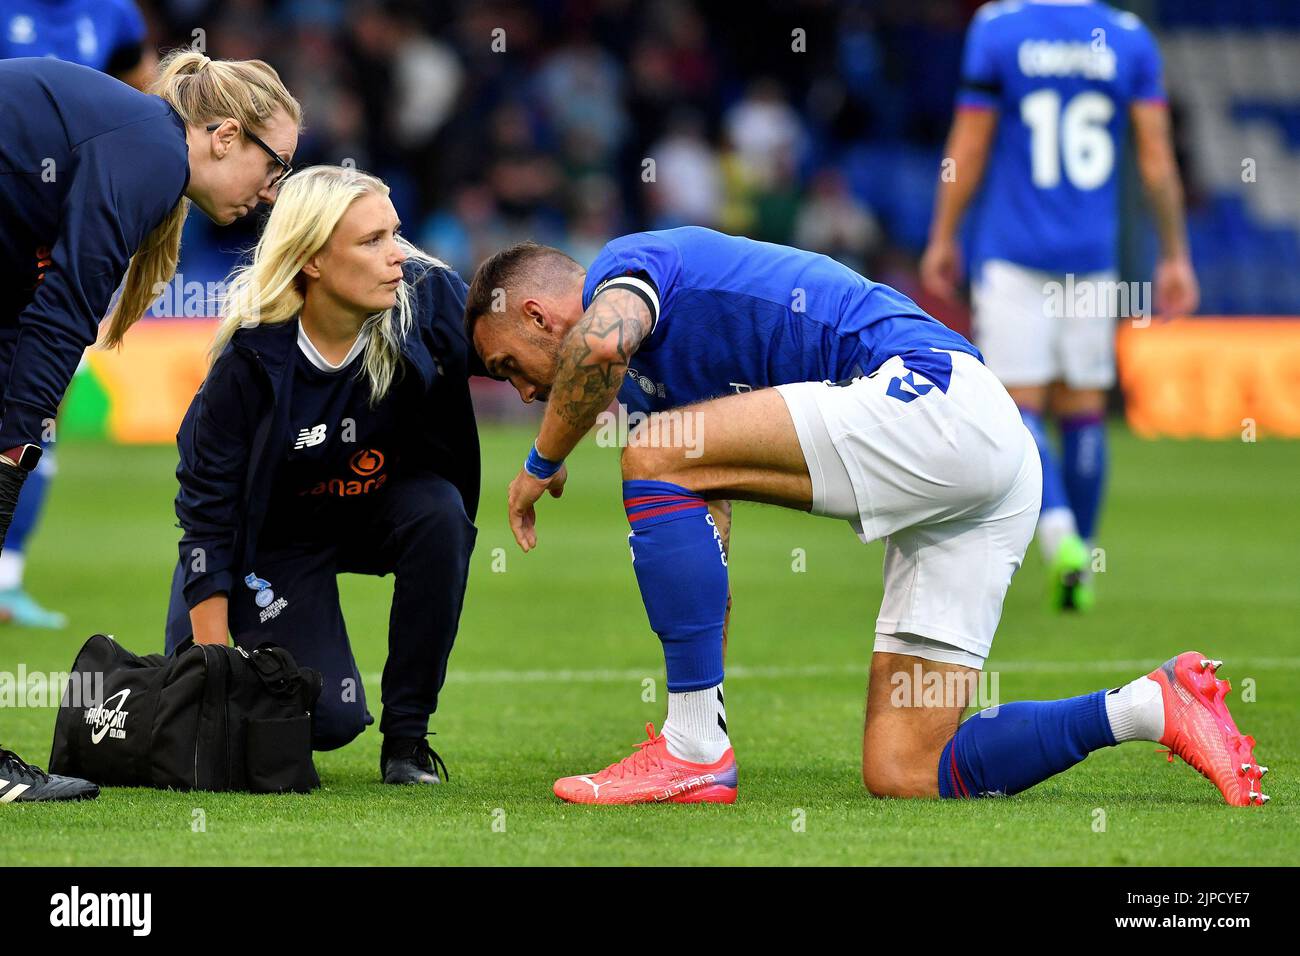 Liam Hogan (Captain) of Oldham Athletic gets treatment during the Vanarama National League match between Oldham Athletic and Wealdstone at Boundary Park, Oldham on Wednesday 17th August 2022. (Credit: Eddie Garvey | MI News) Credit: MI News & Sport /Alamy Live News Stock Photo